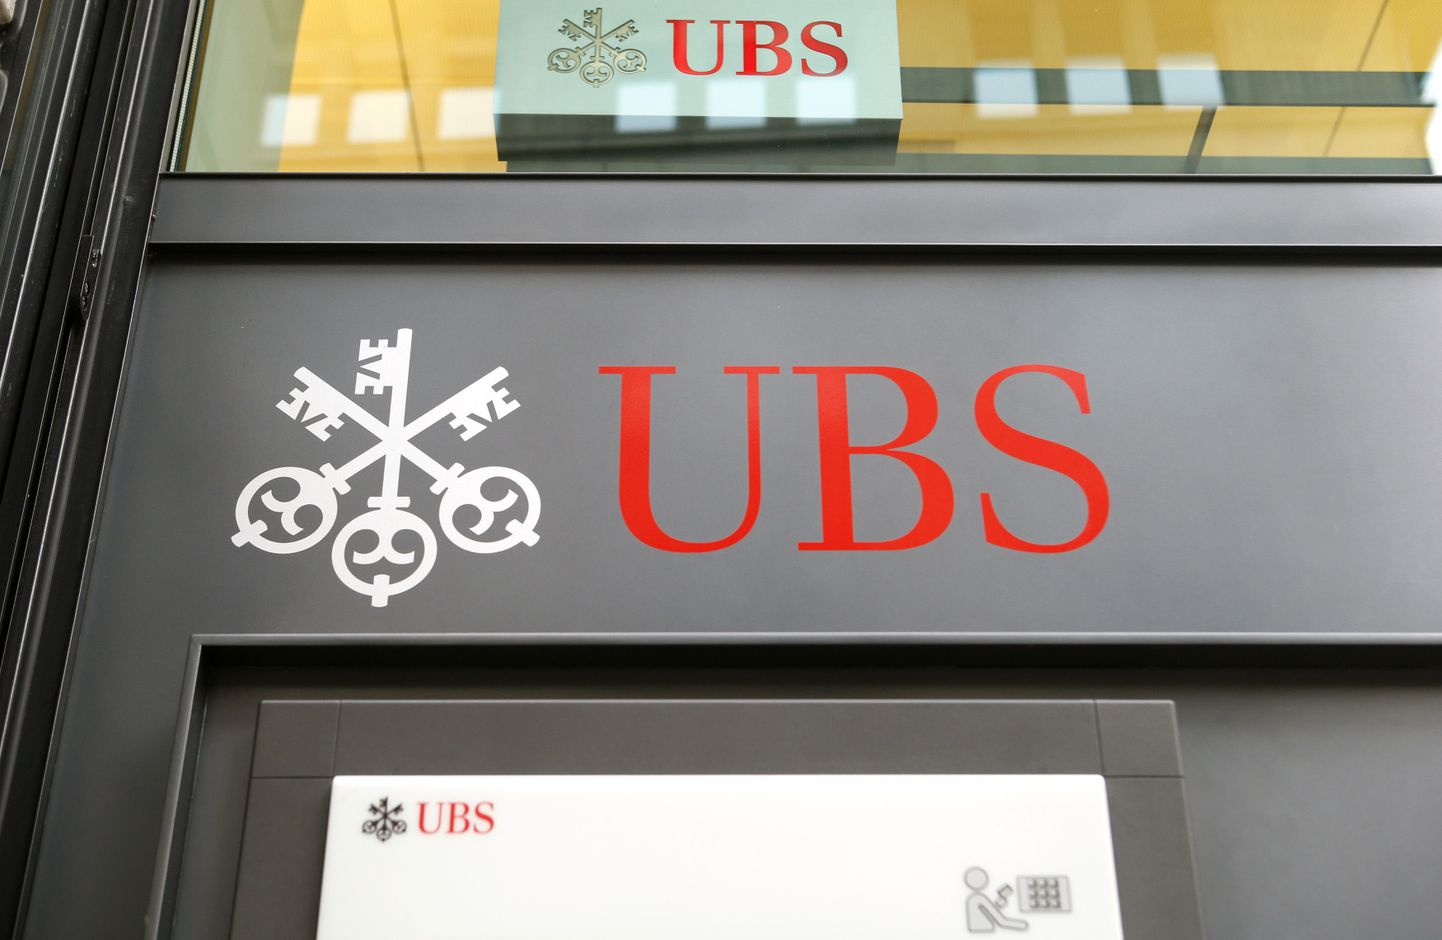 Prices bank. UBS банк. Швейцарский банк. Швейцарские банки. Логотипы швейцарских банков.